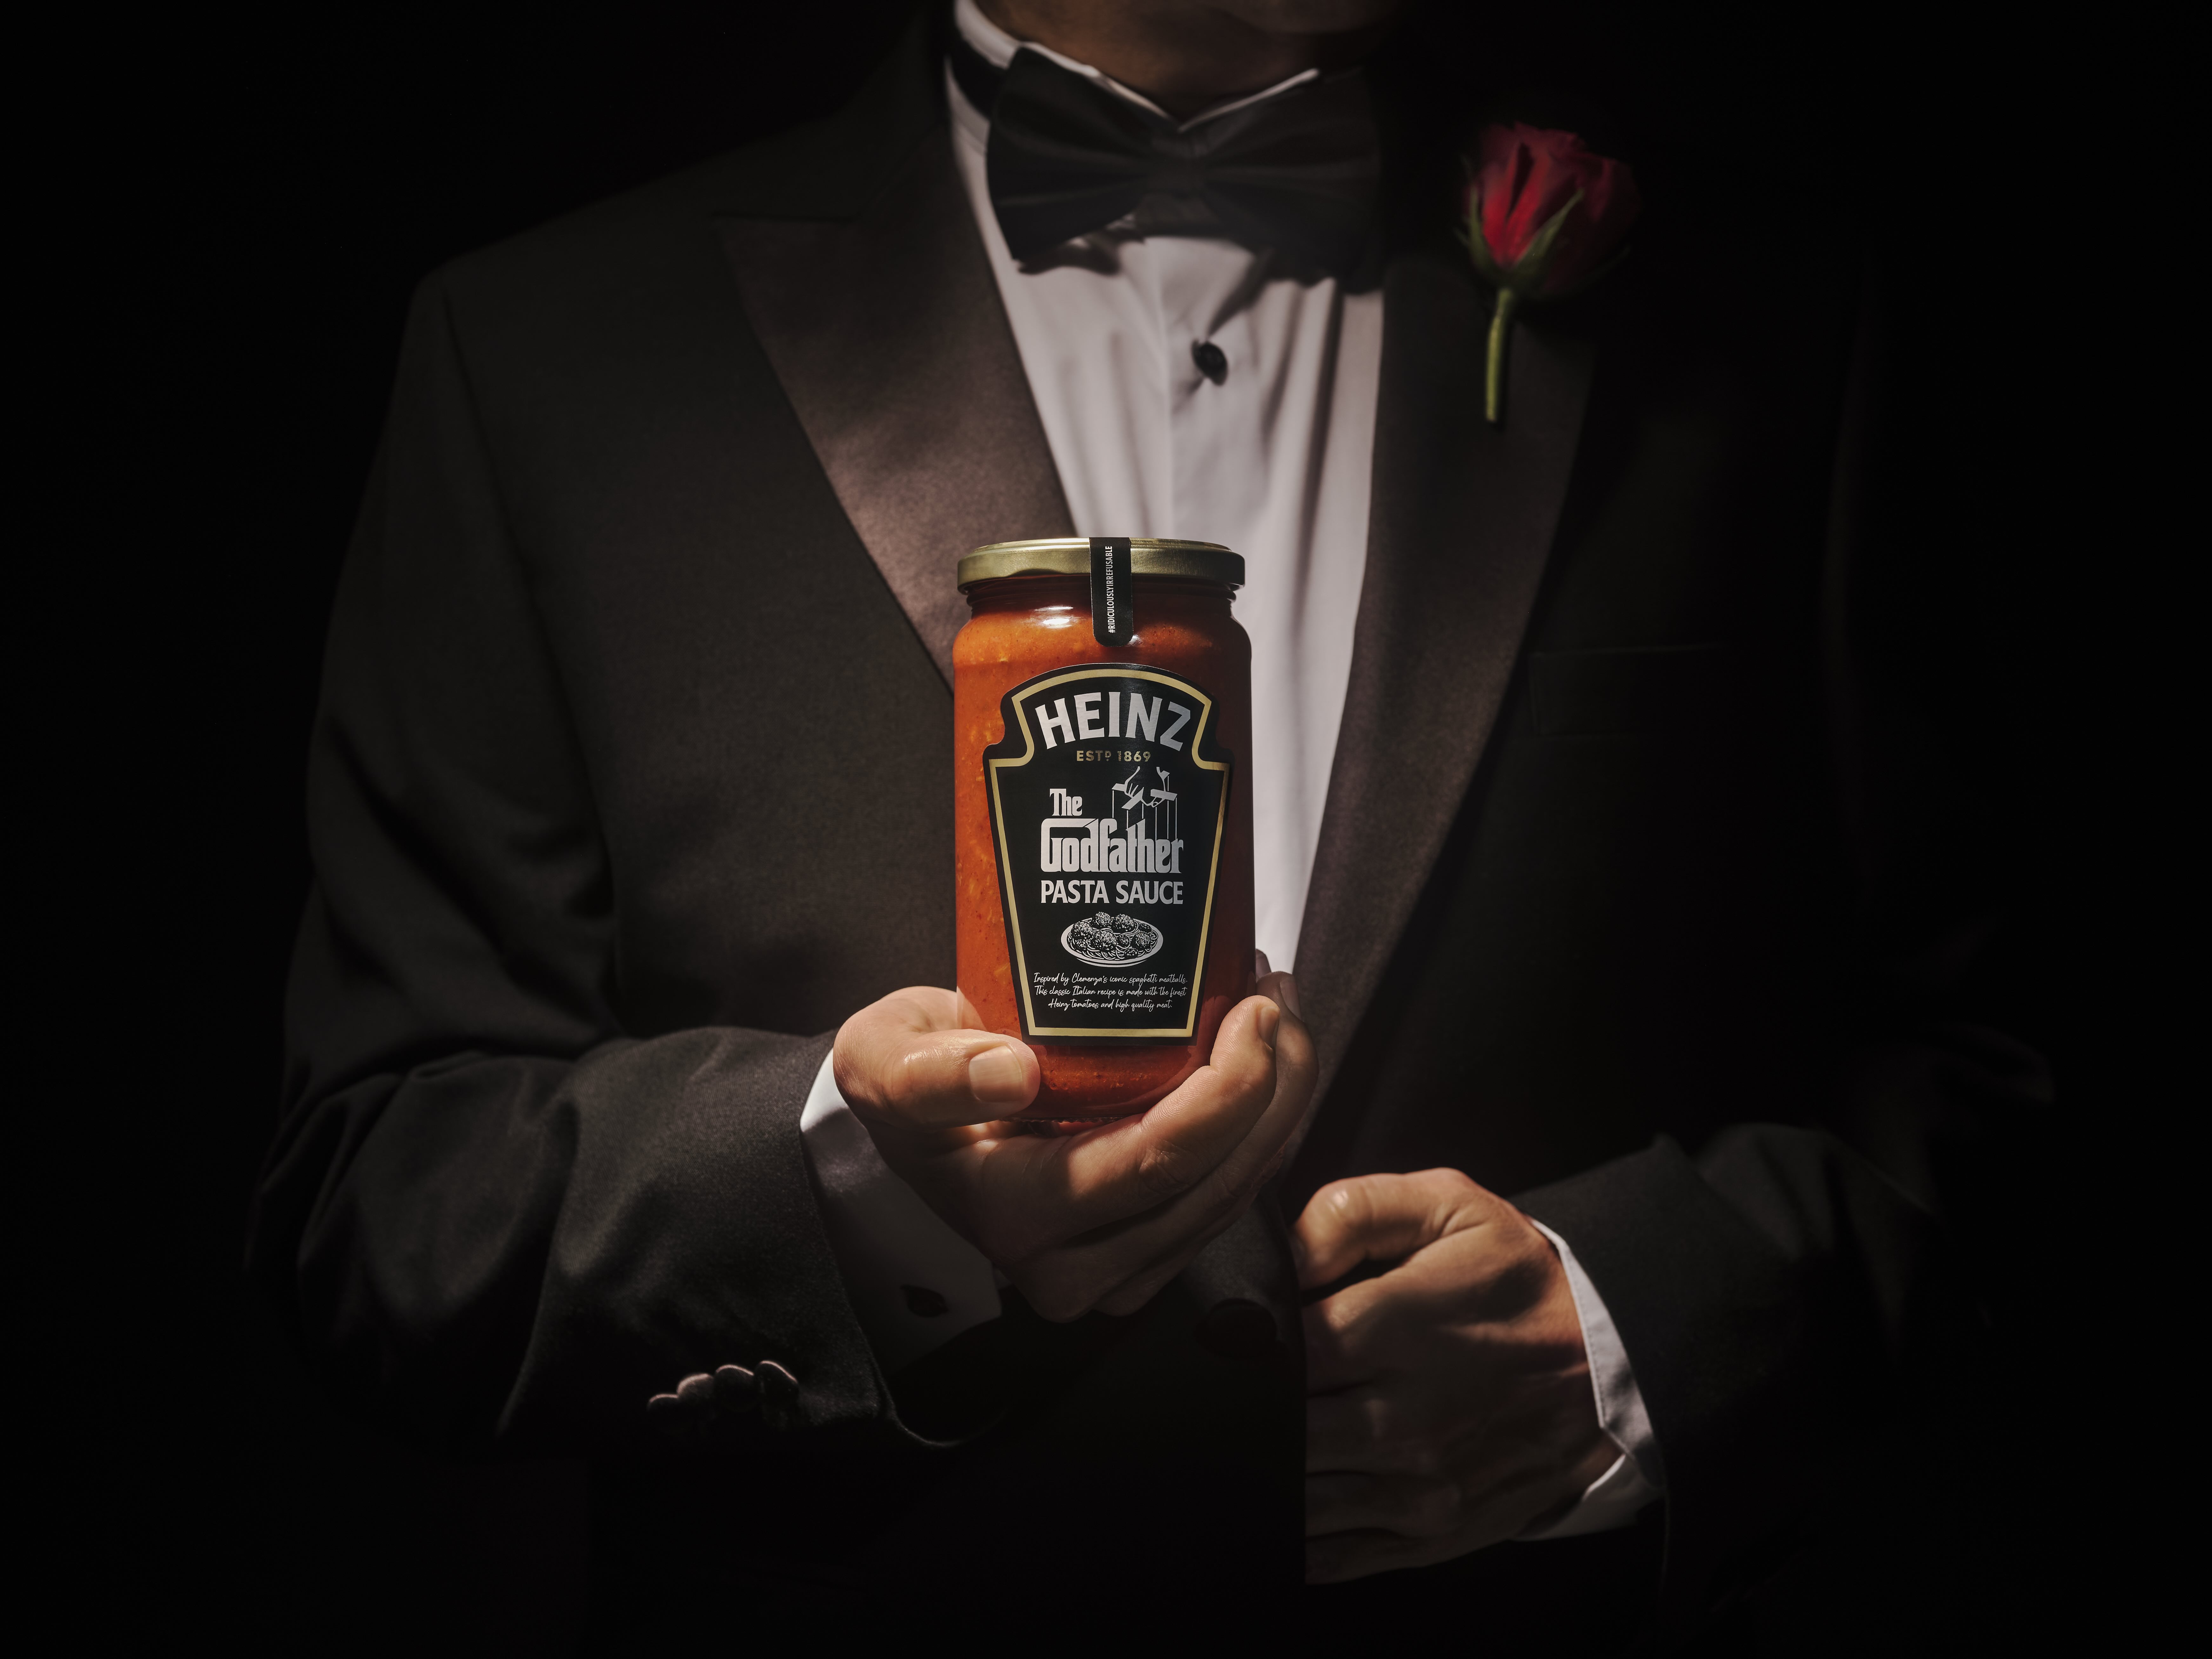 Man in black suit holding Heinz & The Godfather Pasta Sauce